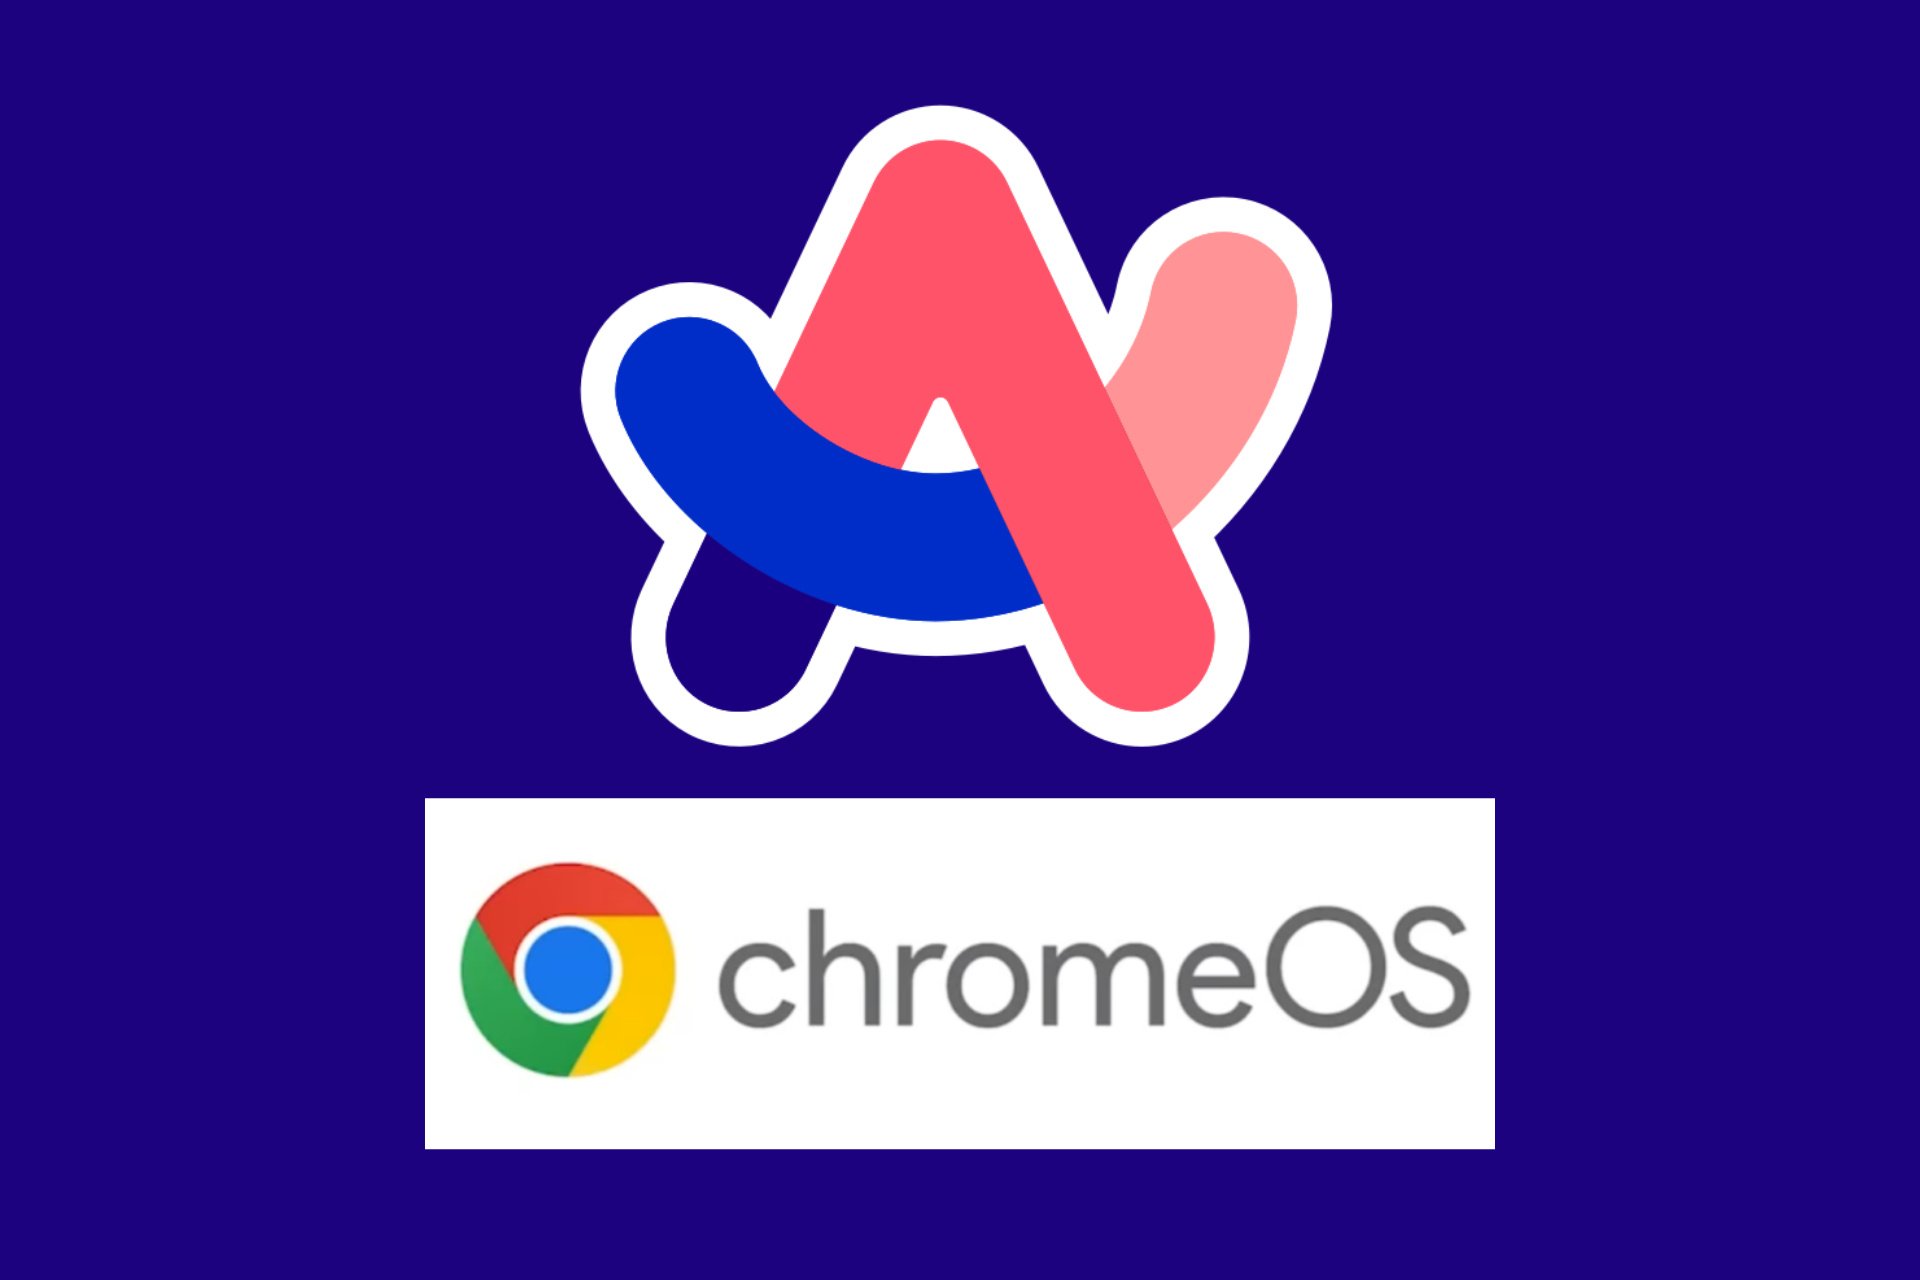 How to install Arc browser on Chromebook